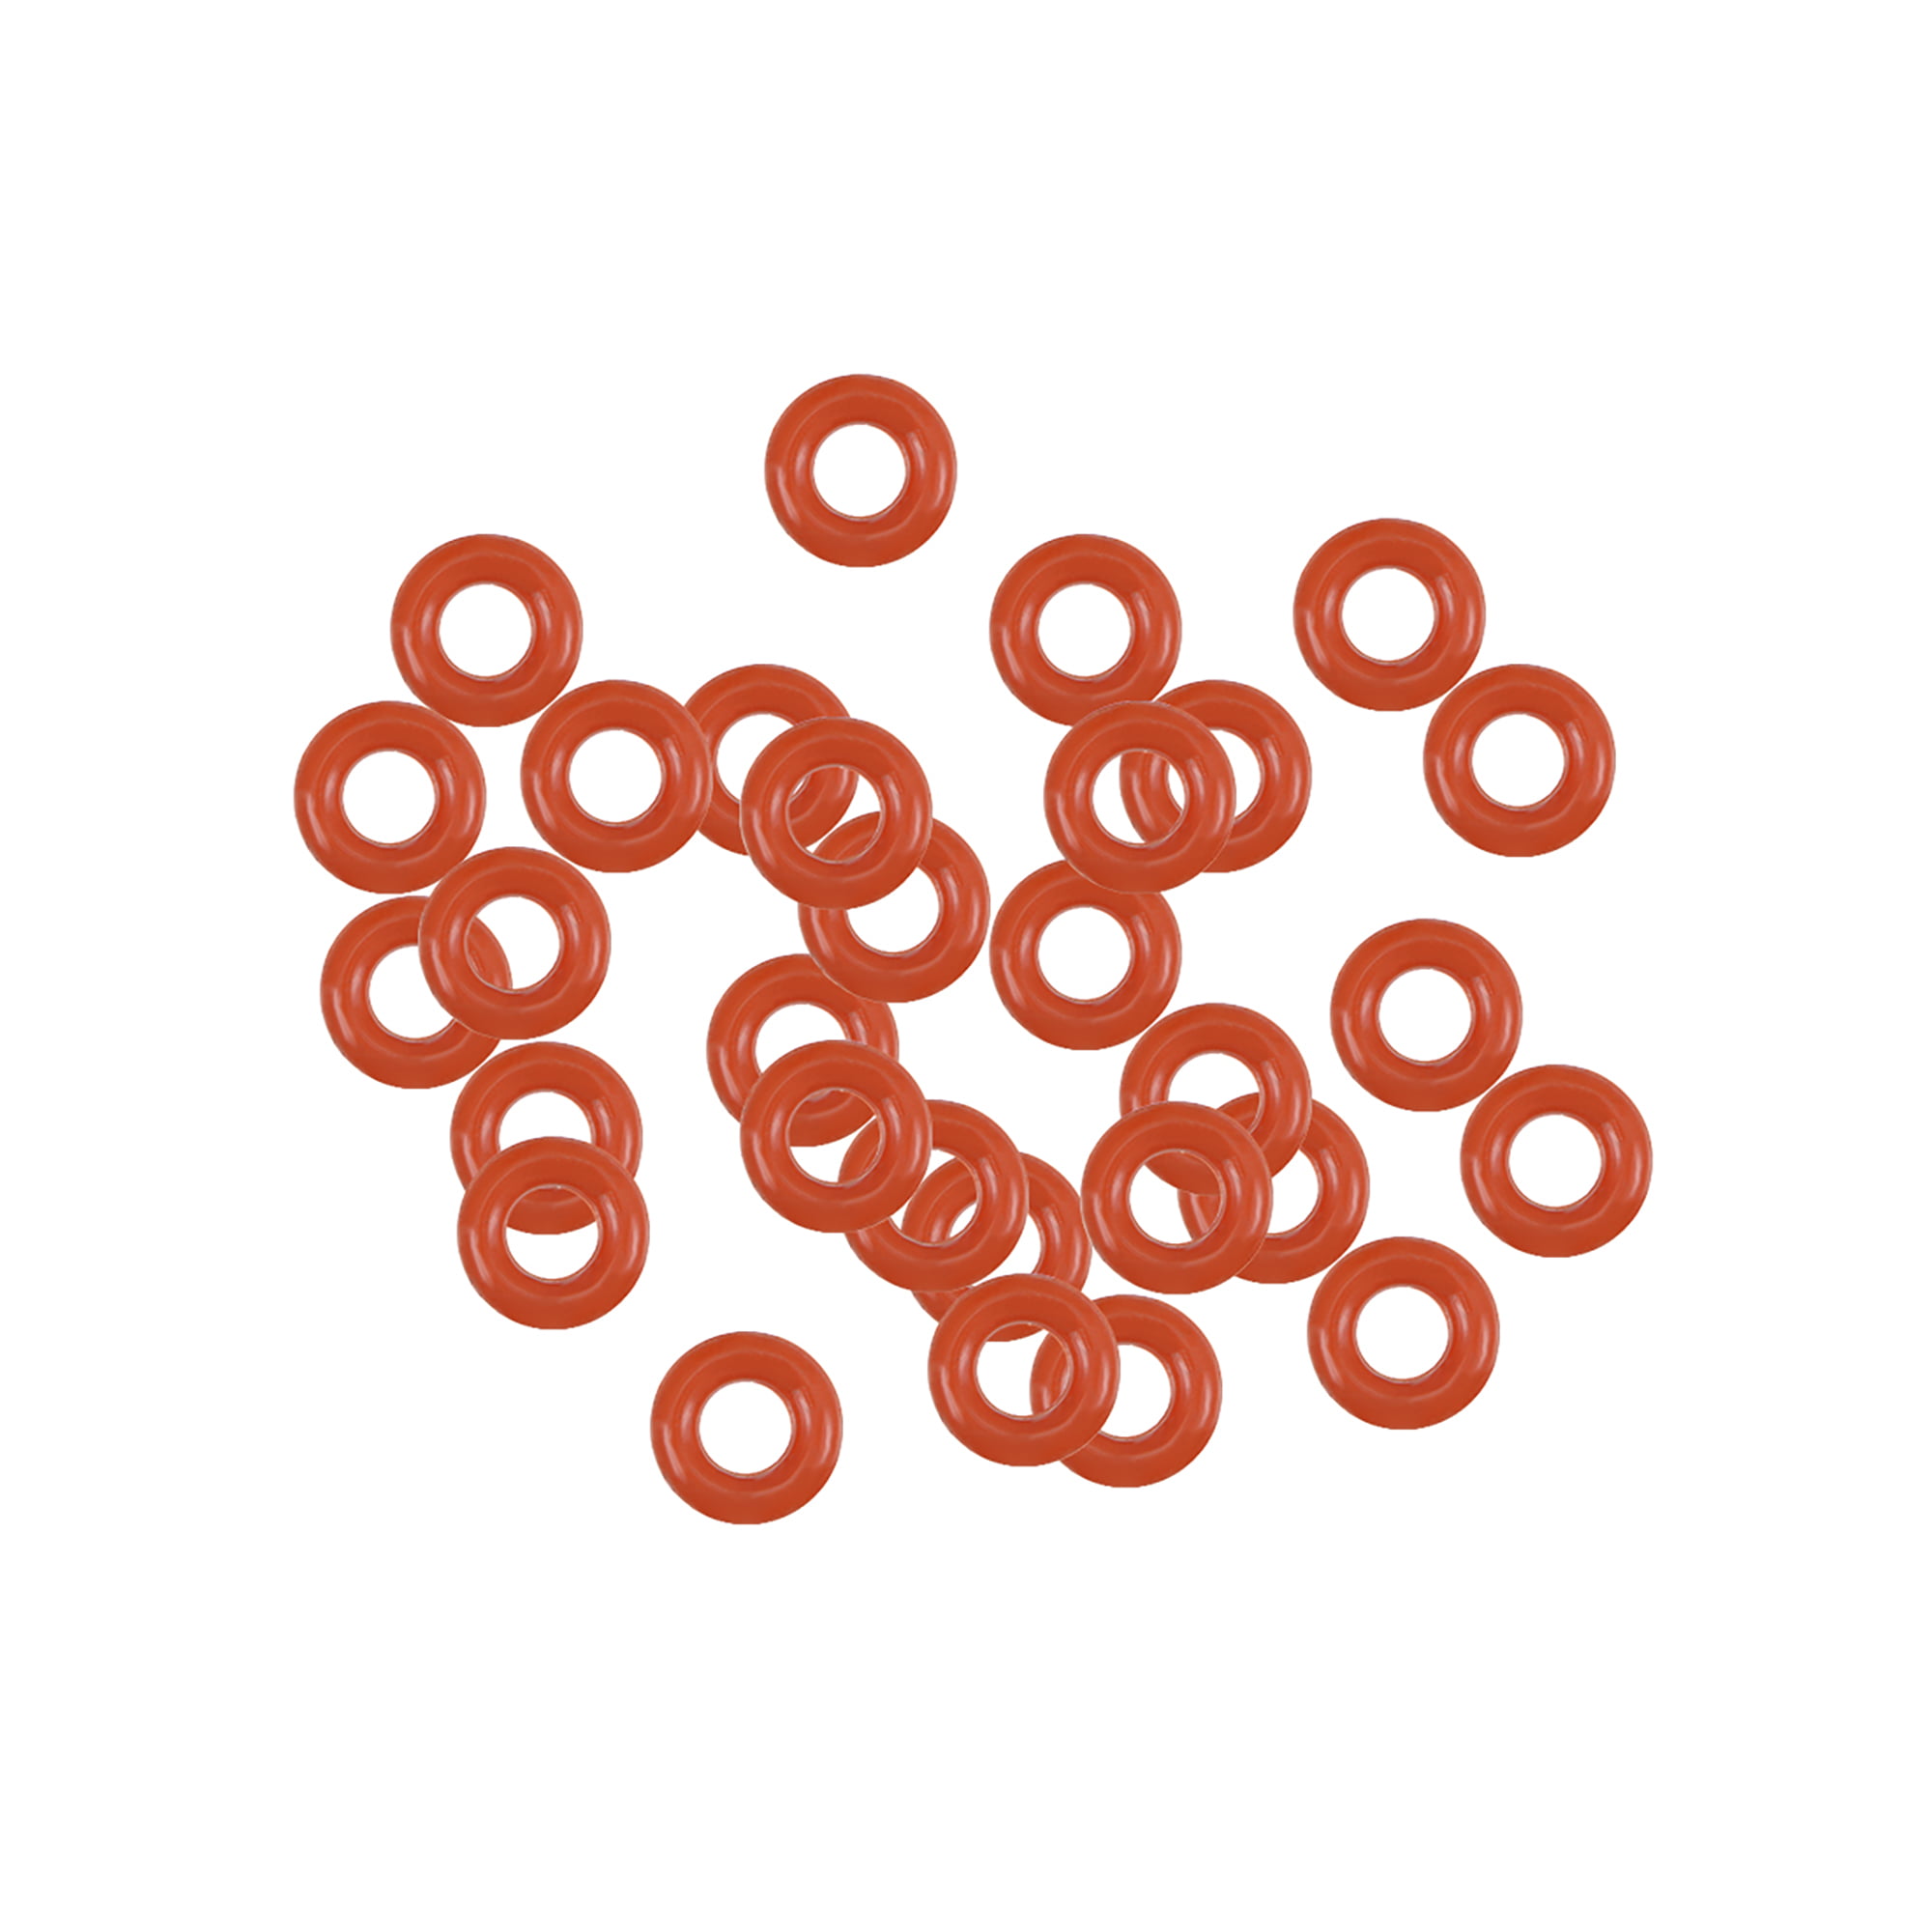 1mm Width Seal Gasket Red 30Pcs 2mm Inner Diameter Details about   Silicone O-Rings 4mm OD